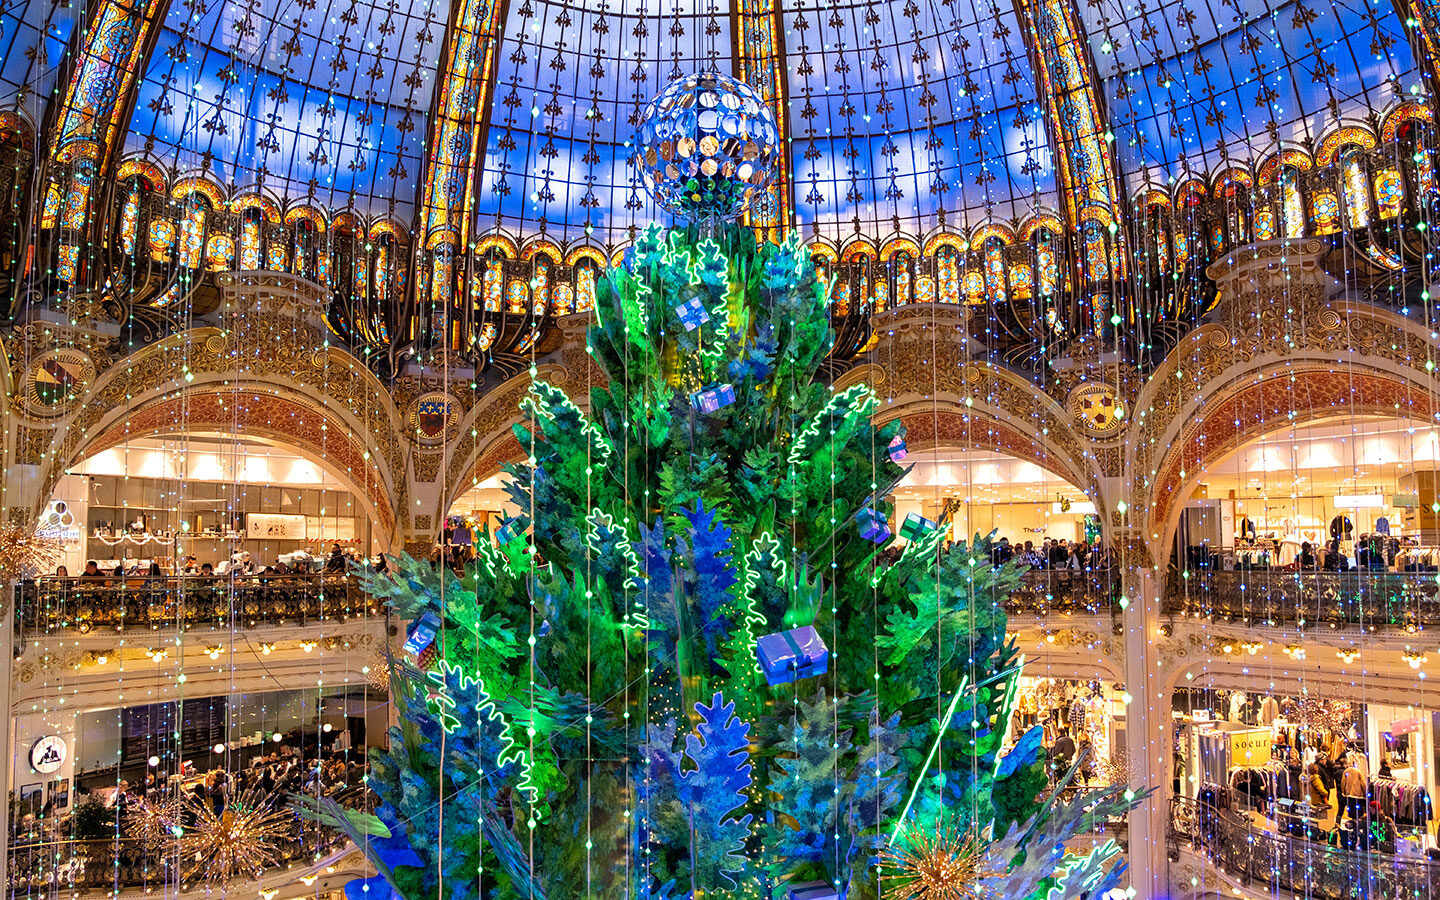 Giant Christmas tree at Galeries Lafayette in Paris